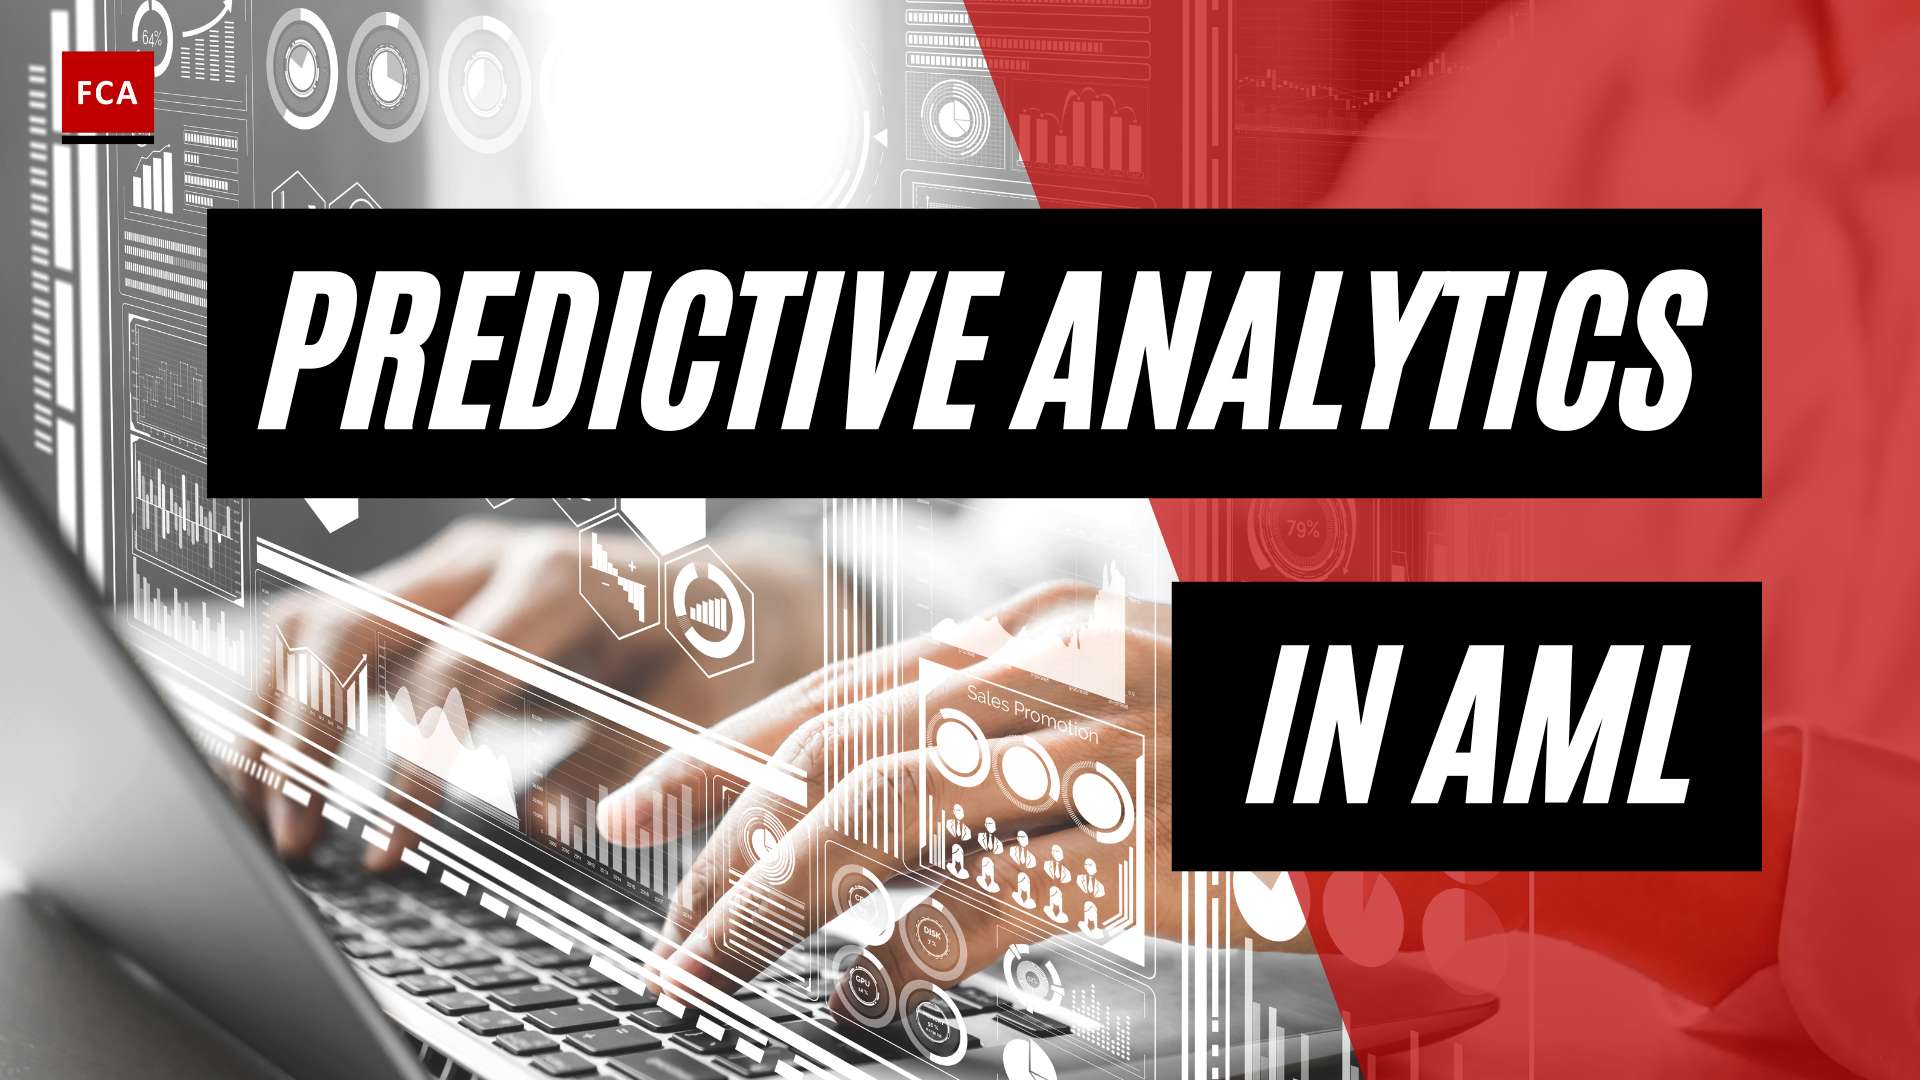 Stay Ahead Of The Game: Leveraging Predictive Analytics In Aml